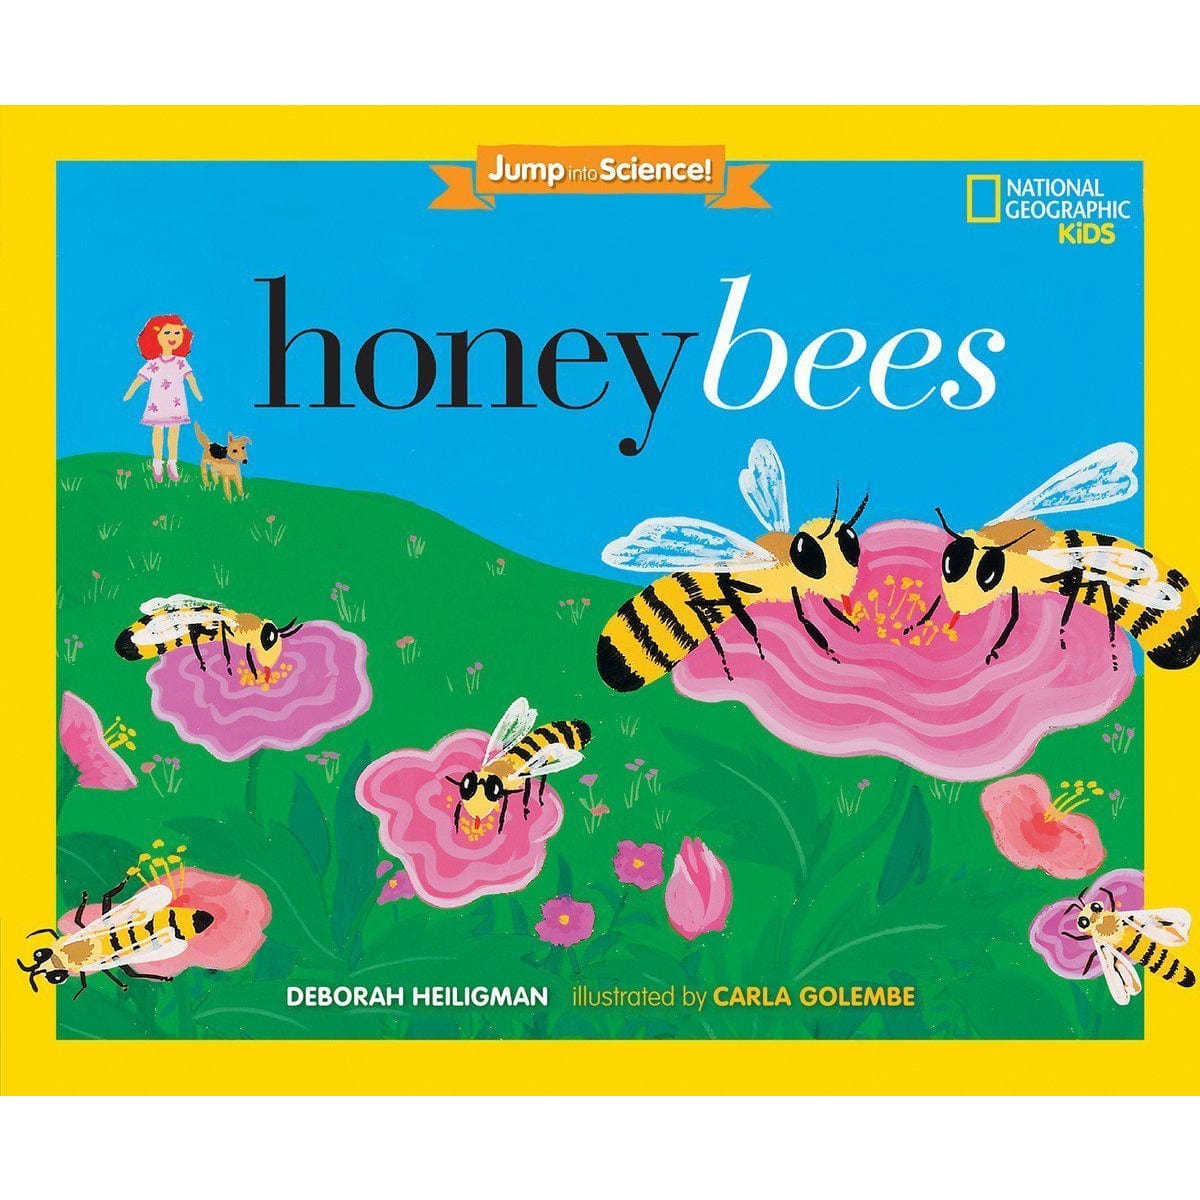 Educational Bee Book for Kids-Nat Geo Jump into Science- Honey Bees! - The Pink Pigs, A Compassionate Boutique